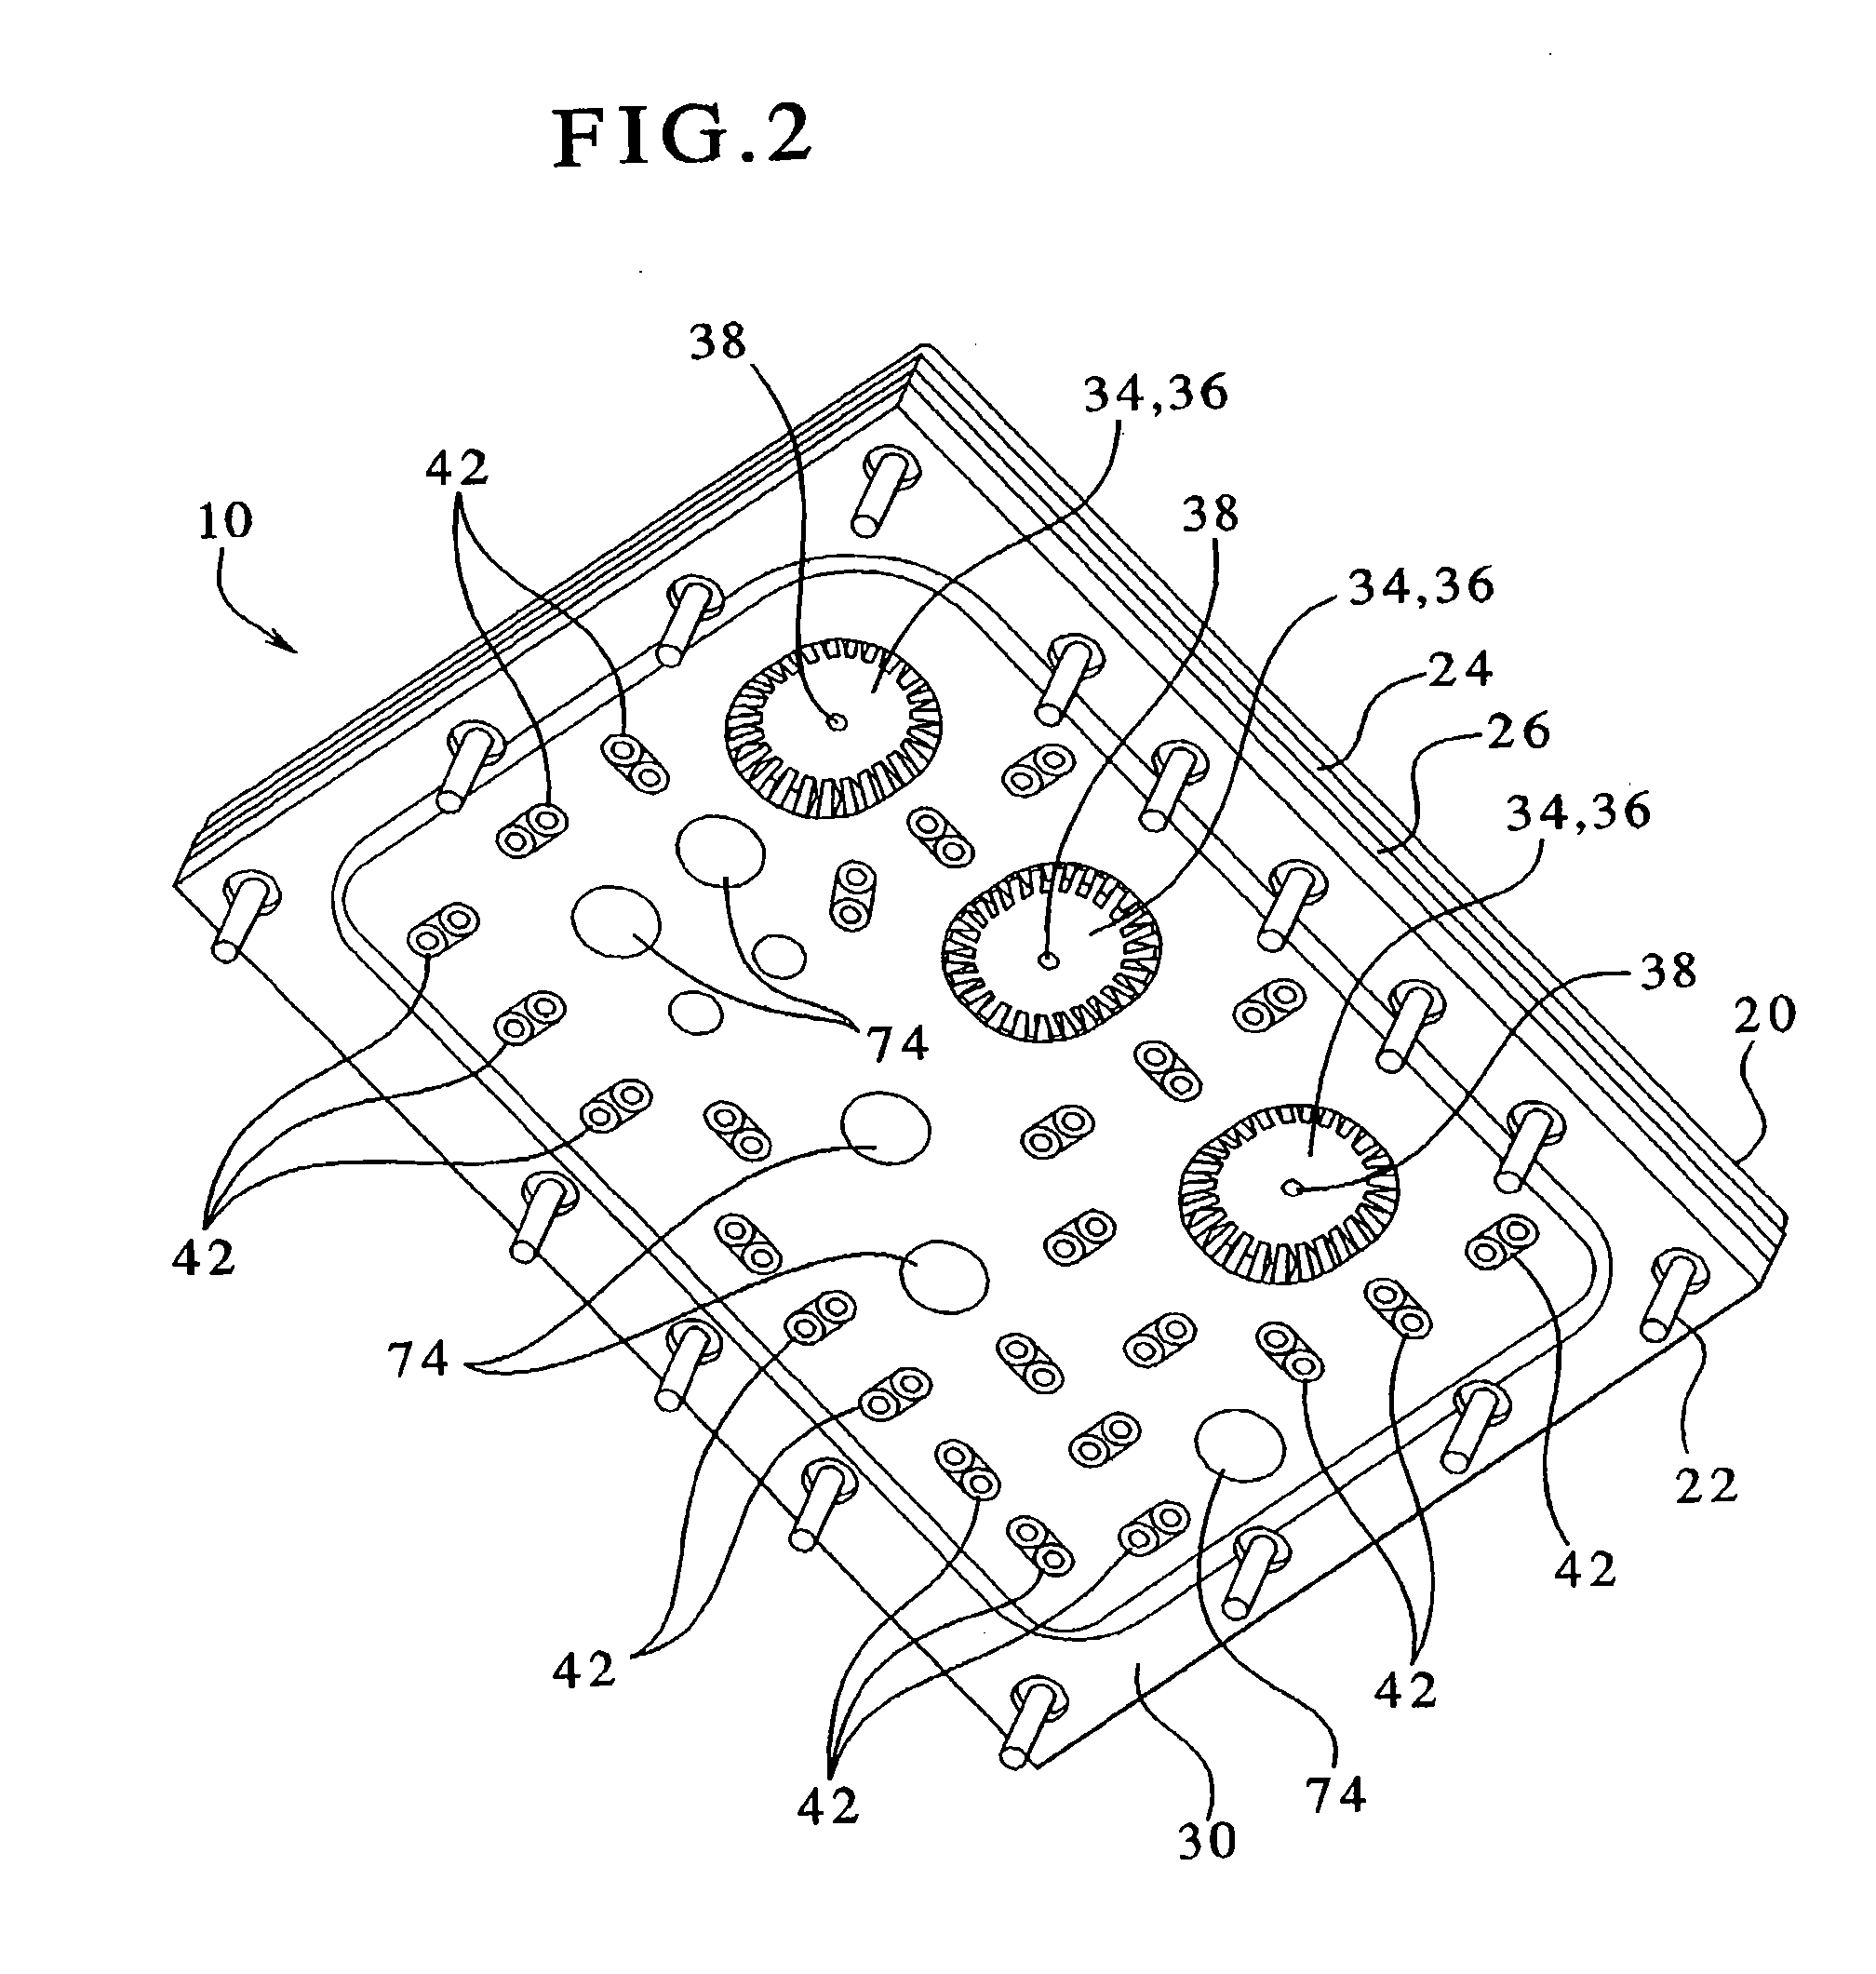 System including machine interface for pumping cassette-based therapies